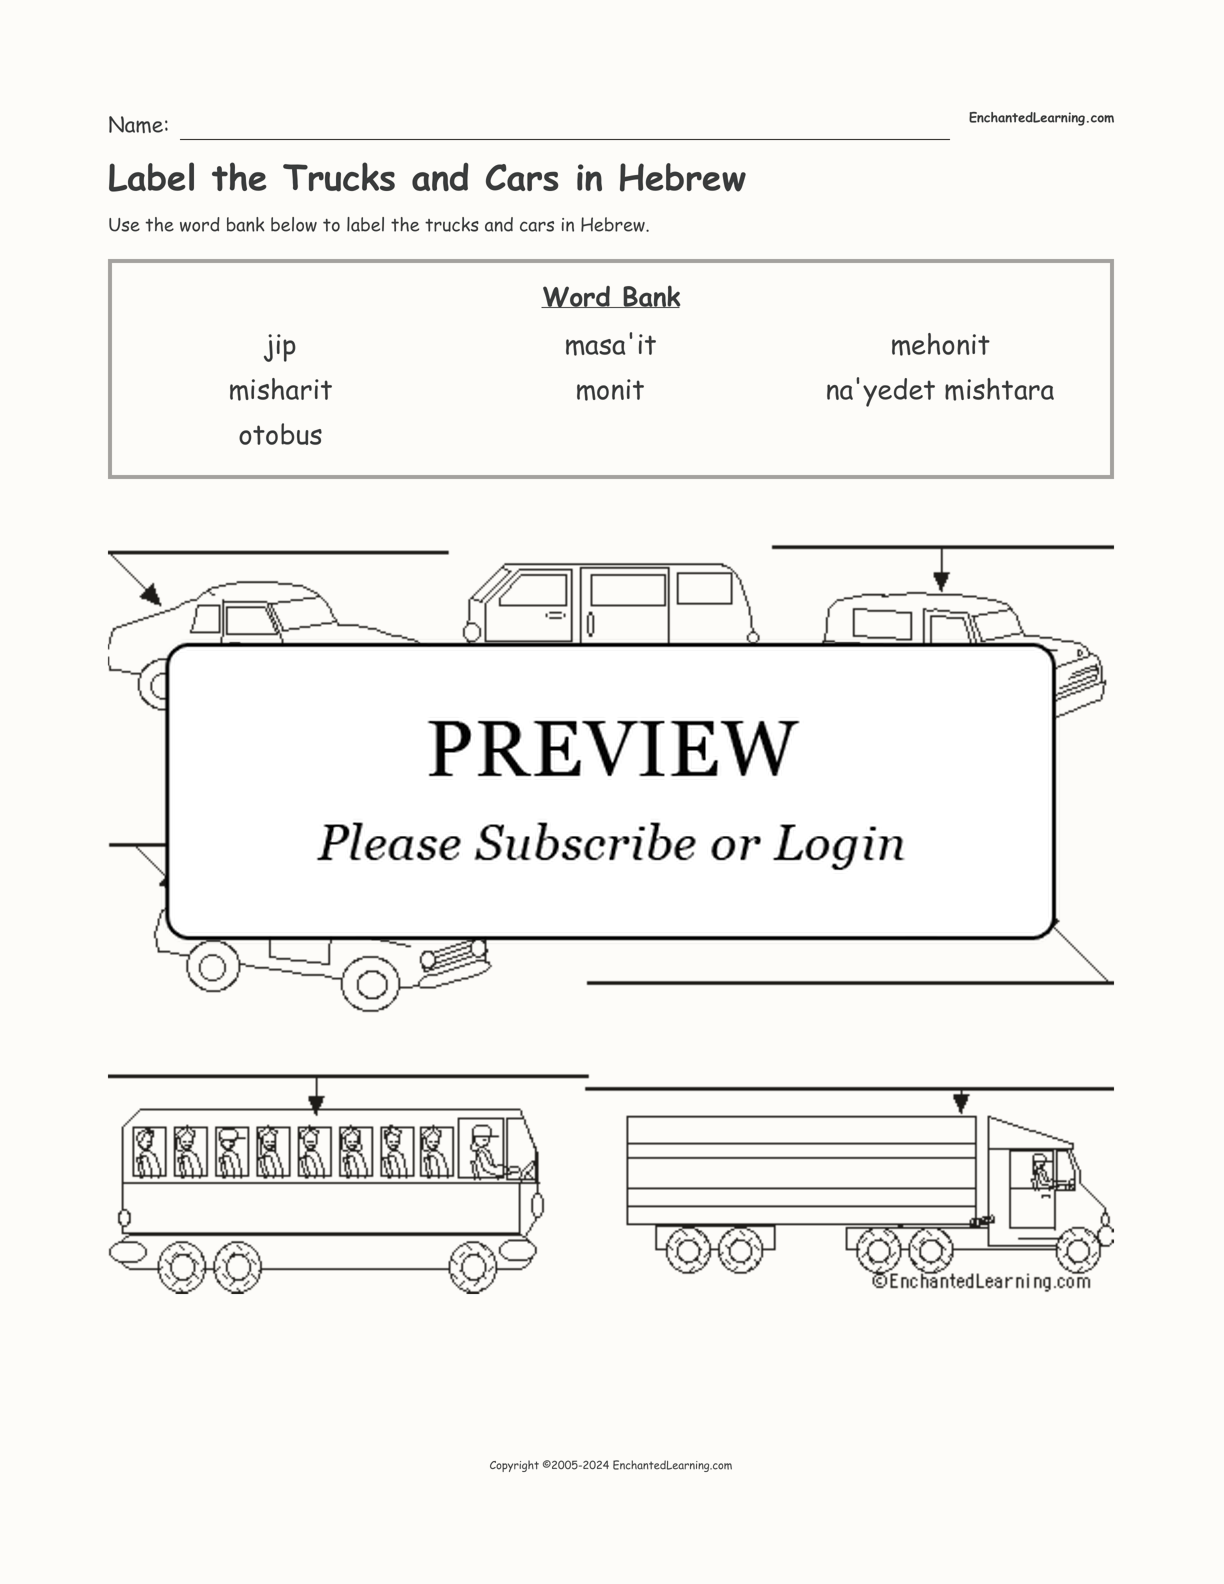 Label the Trucks and Cars in Hebrew interactive worksheet page 1